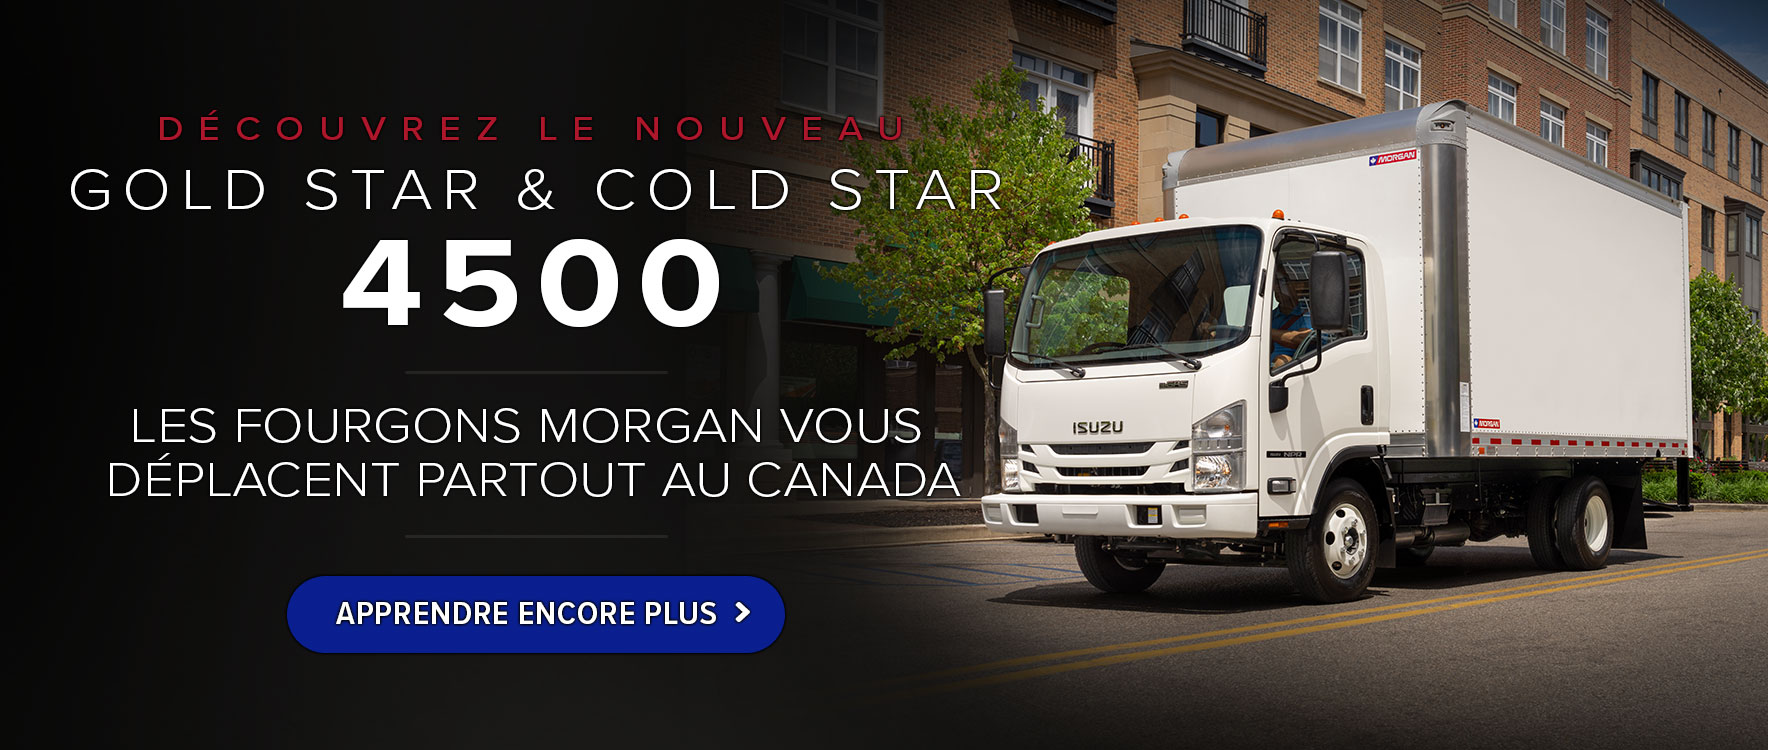 Introducing the new Gold Star and Cold Star 4500